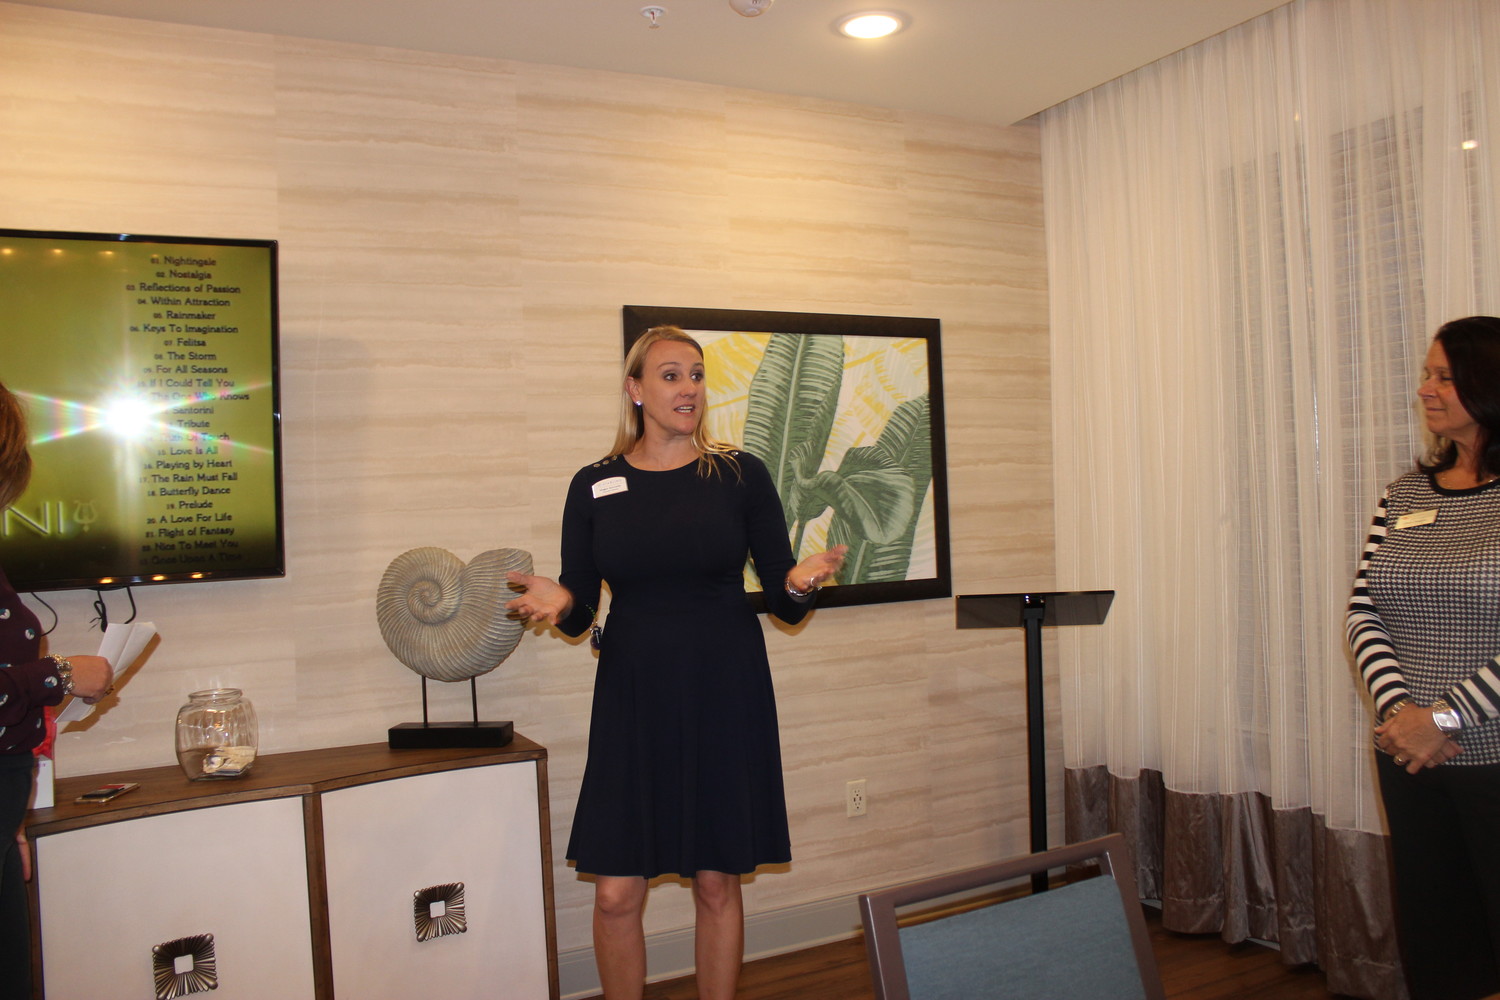 Starling at Nocatee Executive Director Megan Kennedy addresses the event attendees at the Chamber “After Hours” event.